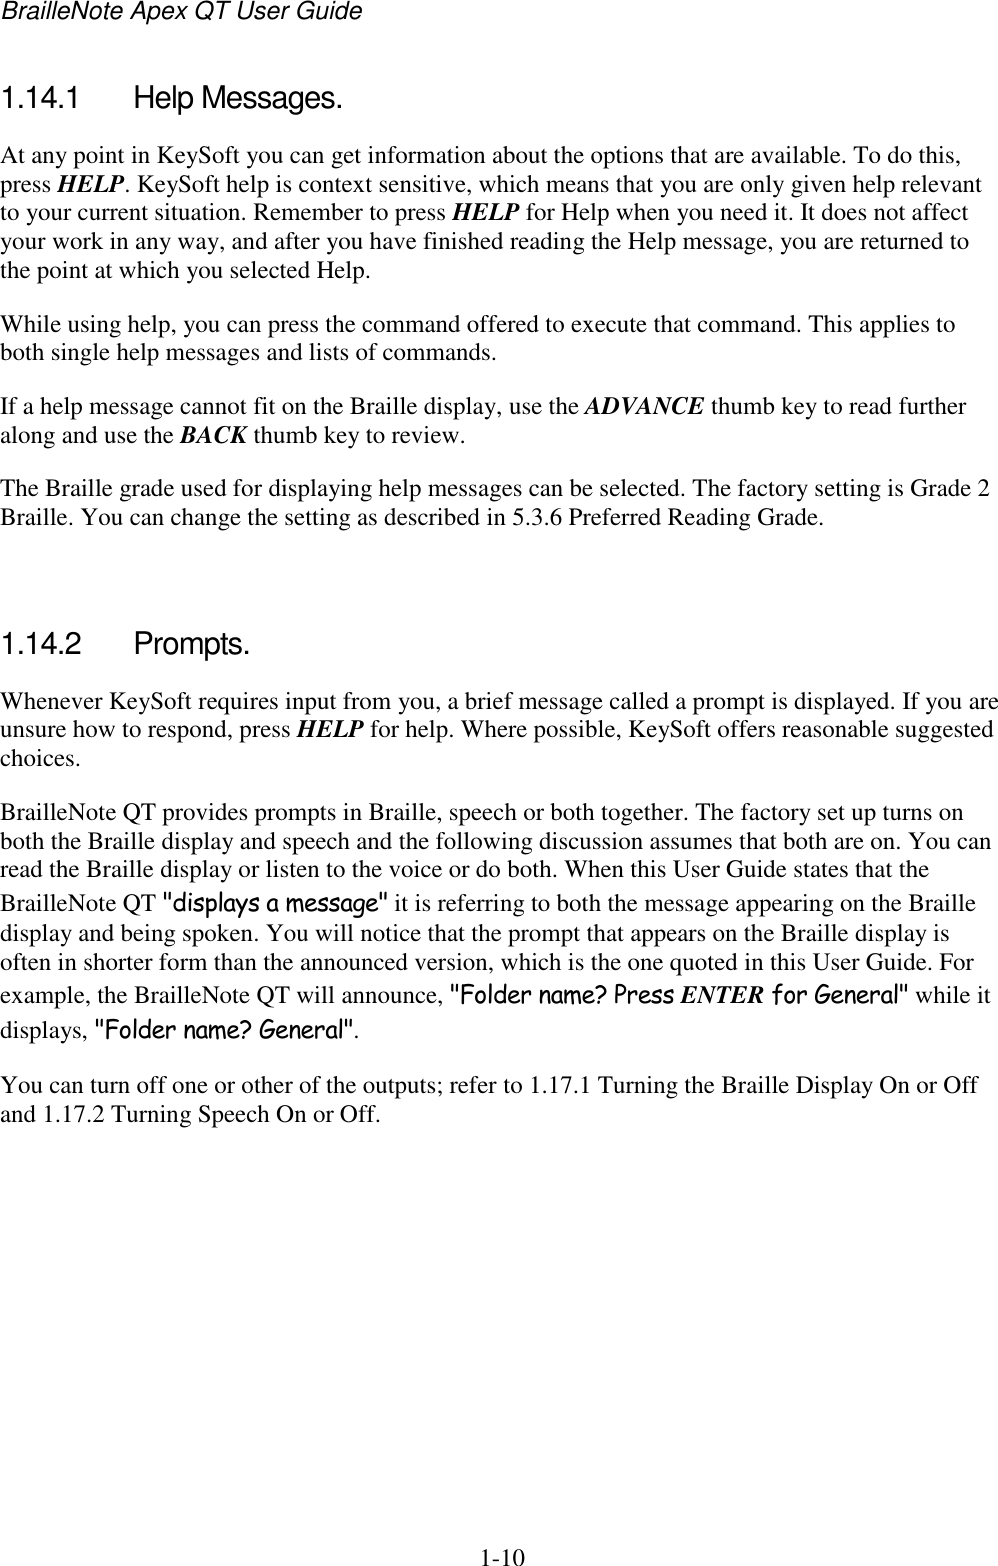 BrailleNote Apex QT User Guide  1-10   1.14.1  Help Messages. At any point in KeySoft you can get information about the options that are available. To do this, press HELP. KeySoft help is context sensitive, which means that you are only given help relevant to your current situation. Remember to press HELP for Help when you need it. It does not affect your work in any way, and after you have finished reading the Help message, you are returned to the point at which you selected Help. While using help, you can press the command offered to execute that command. This applies to both single help messages and lists of commands. If a help message cannot fit on the Braille display, use the ADVANCE thumb key to read further along and use the BACK thumb key to review.  The Braille grade used for displaying help messages can be selected. The factory setting is Grade 2 Braille. You can change the setting as described in 5.3.6 Preferred Reading Grade.   1.14.2  Prompts. Whenever KeySoft requires input from you, a brief message called a prompt is displayed. If you are unsure how to respond, press HELP for help. Where possible, KeySoft offers reasonable suggested choices. BrailleNote QT provides prompts in Braille, speech or both together. The factory set up turns on both the Braille display and speech and the following discussion assumes that both are on. You can read the Braille display or listen to the voice or do both. When this User Guide states that the BrailleNote QT &quot;displays a message&quot; it is referring to both the message appearing on the Braille display and being spoken. You will notice that the prompt that appears on the Braille display is often in shorter form than the announced version, which is the one quoted in this User Guide. For example, the BrailleNote QT will announce, &quot;Folder name? Press ENTER for General&quot; while it displays, &quot;Folder name? General&quot;. You can turn off one or other of the outputs; refer to 1.17.1 Turning the Braille Display On or Off and 1.17.2 Turning Speech On or Off.   